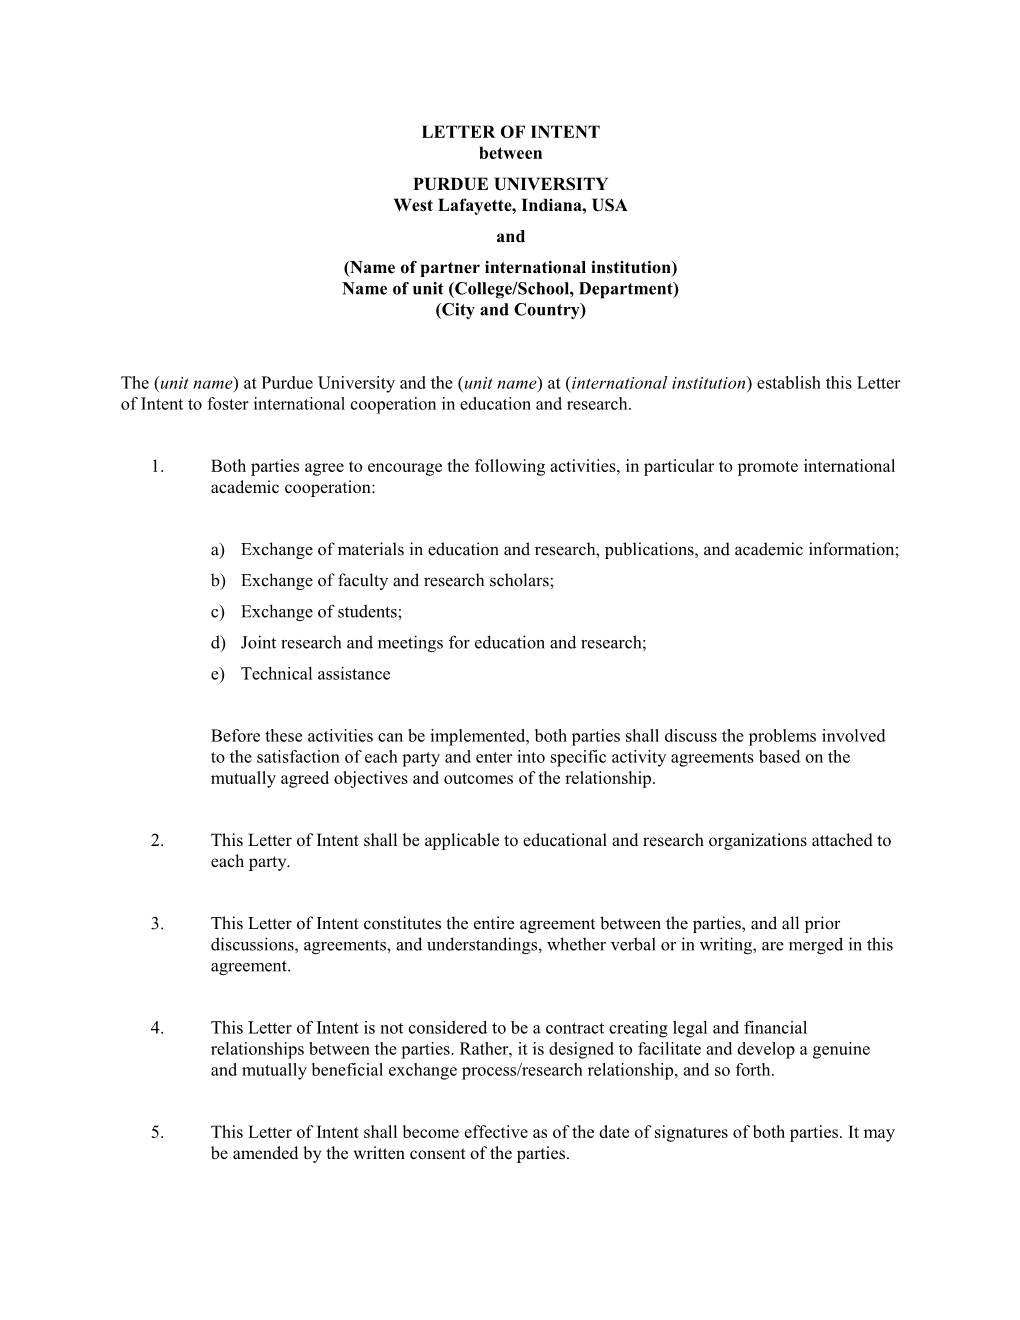 Model One-Way Student Linkage Agreement